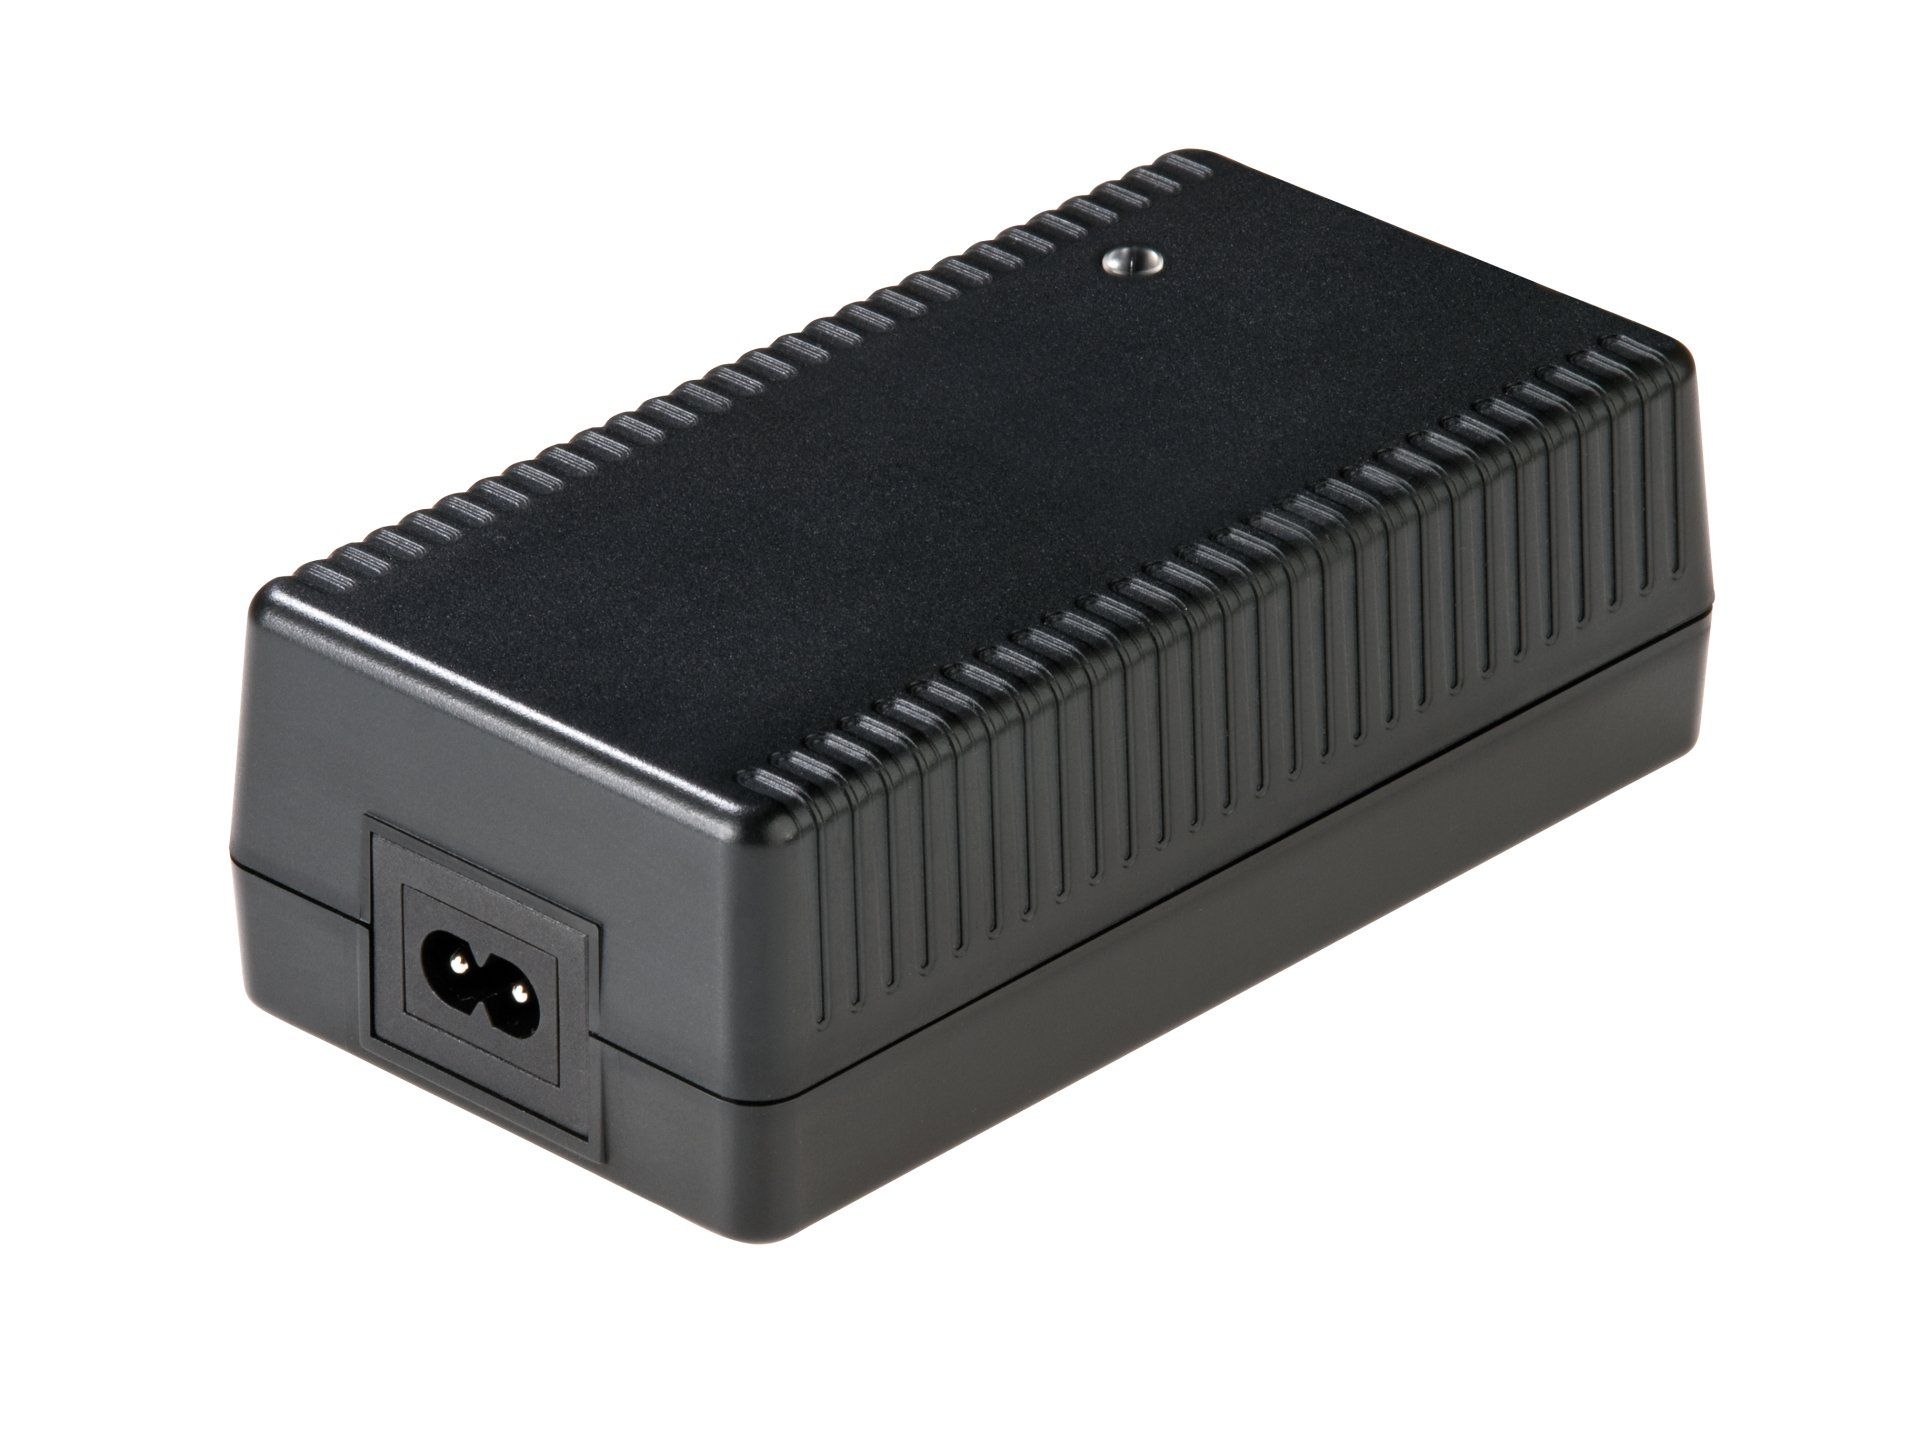 A black desktop power supply with two outlets